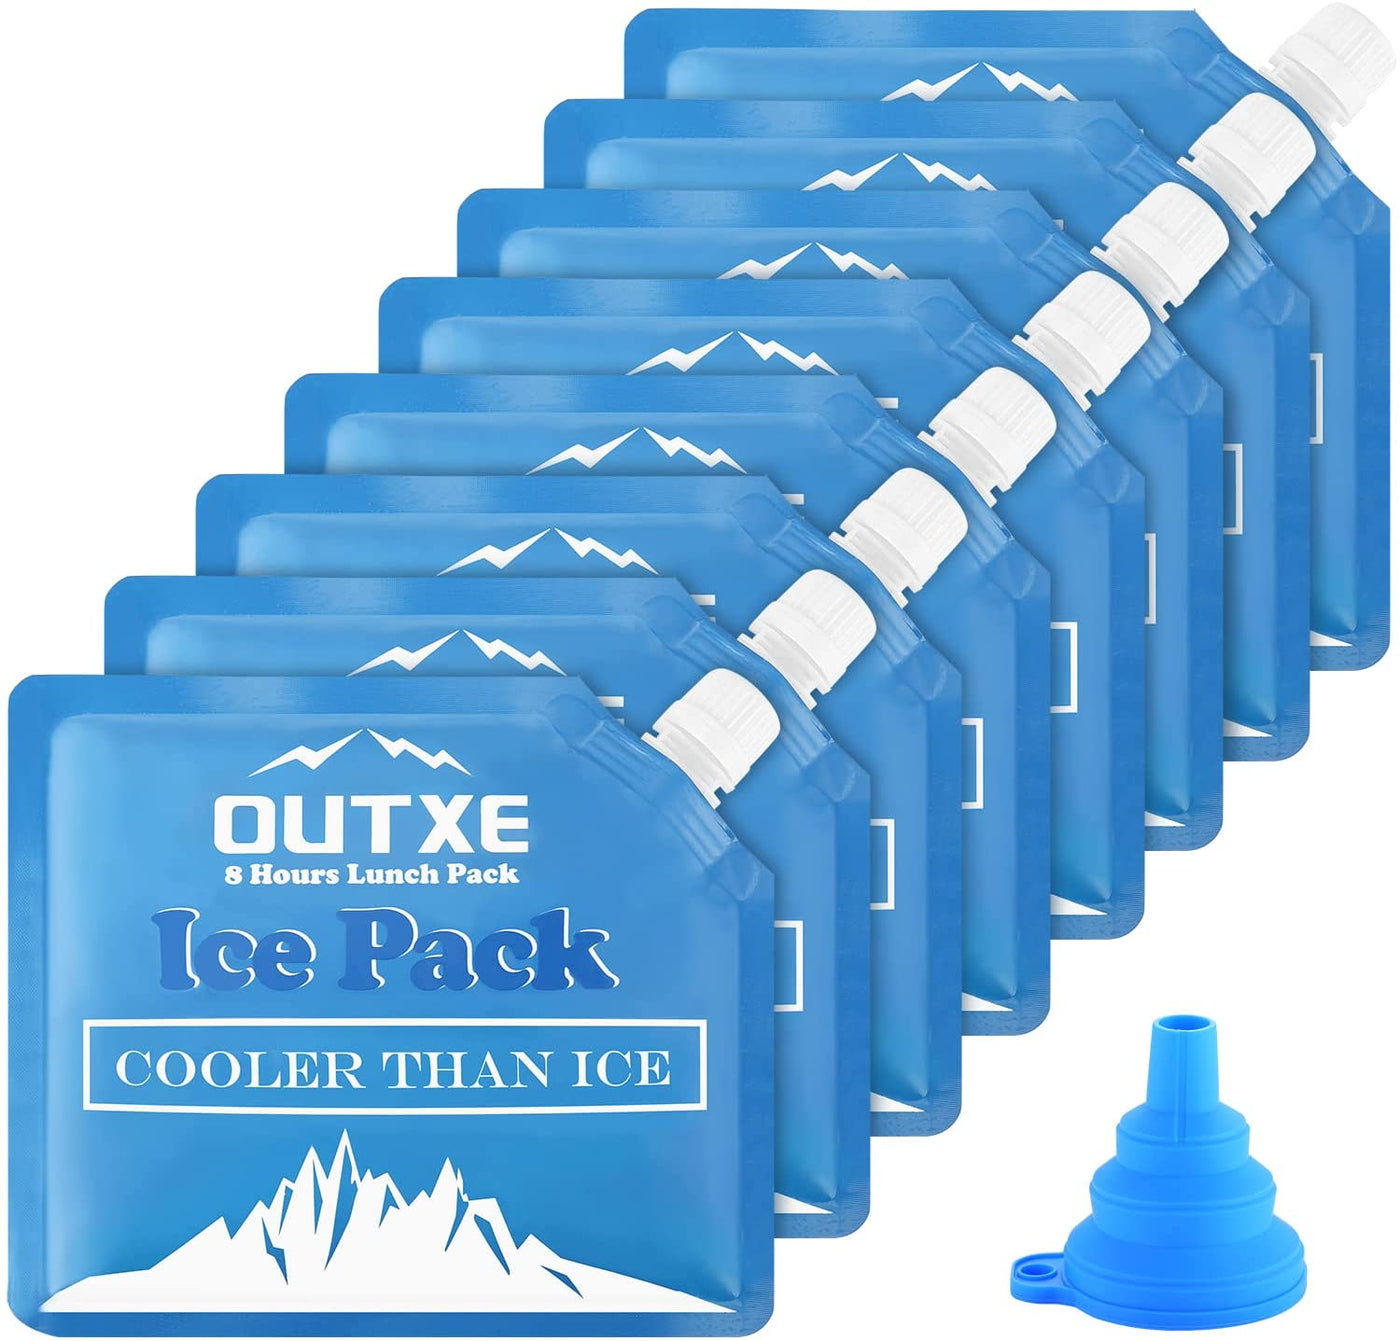 OUTXE Slim Reusable Smal Ice Packs for Lunch Box